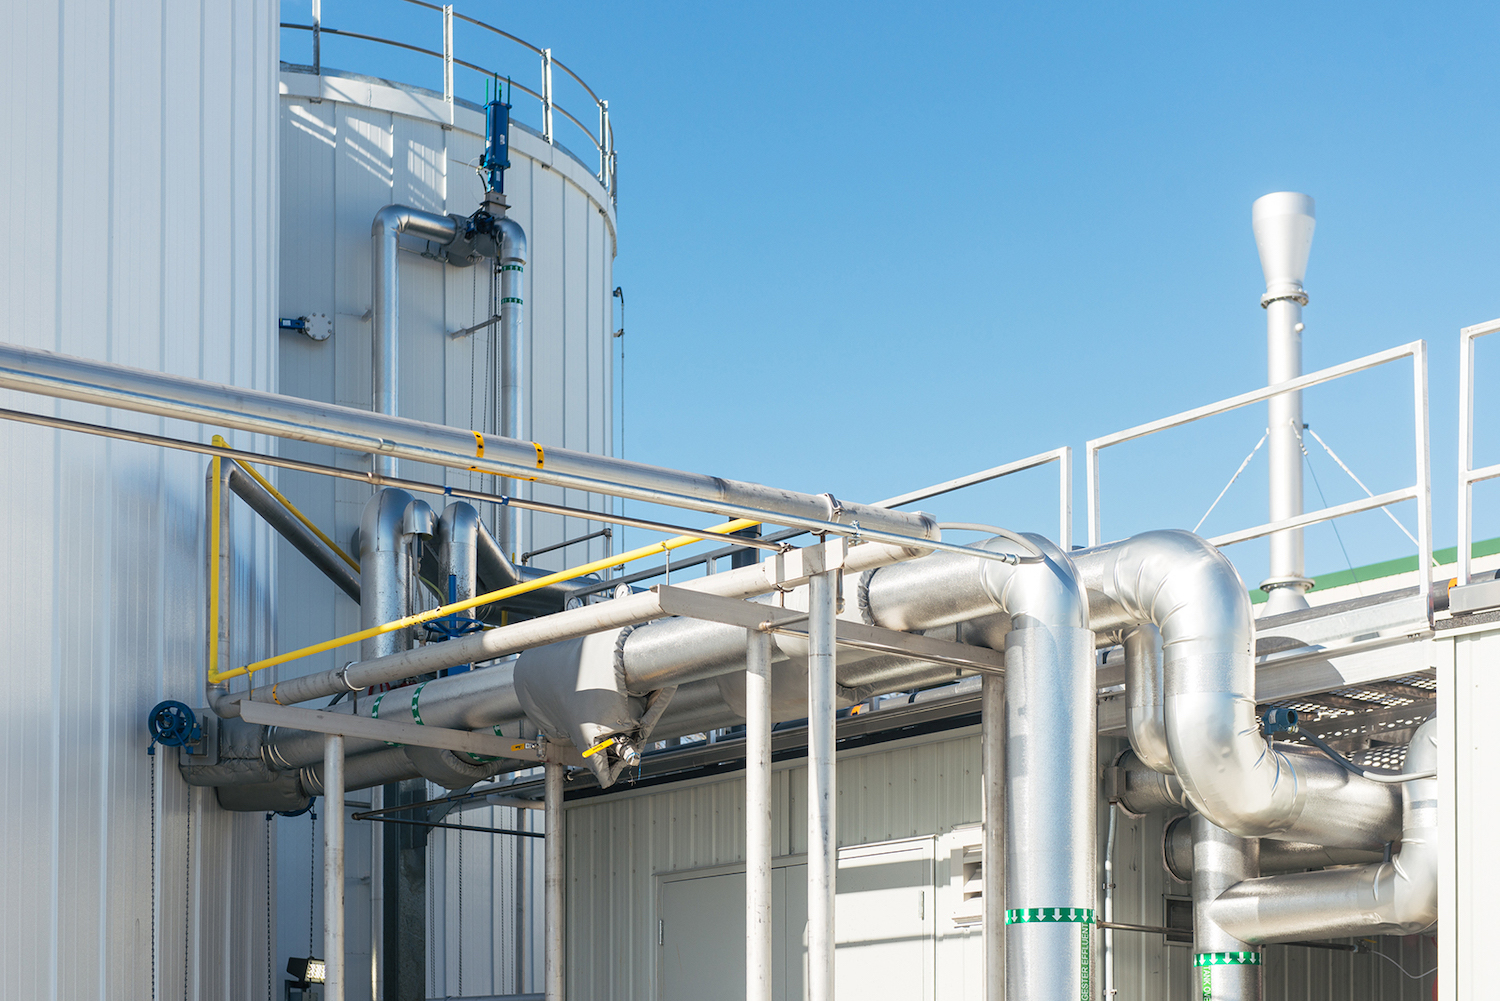 Divert processes 232,000 tons of wasted food per year across 10 anaerobic digestion facilities.